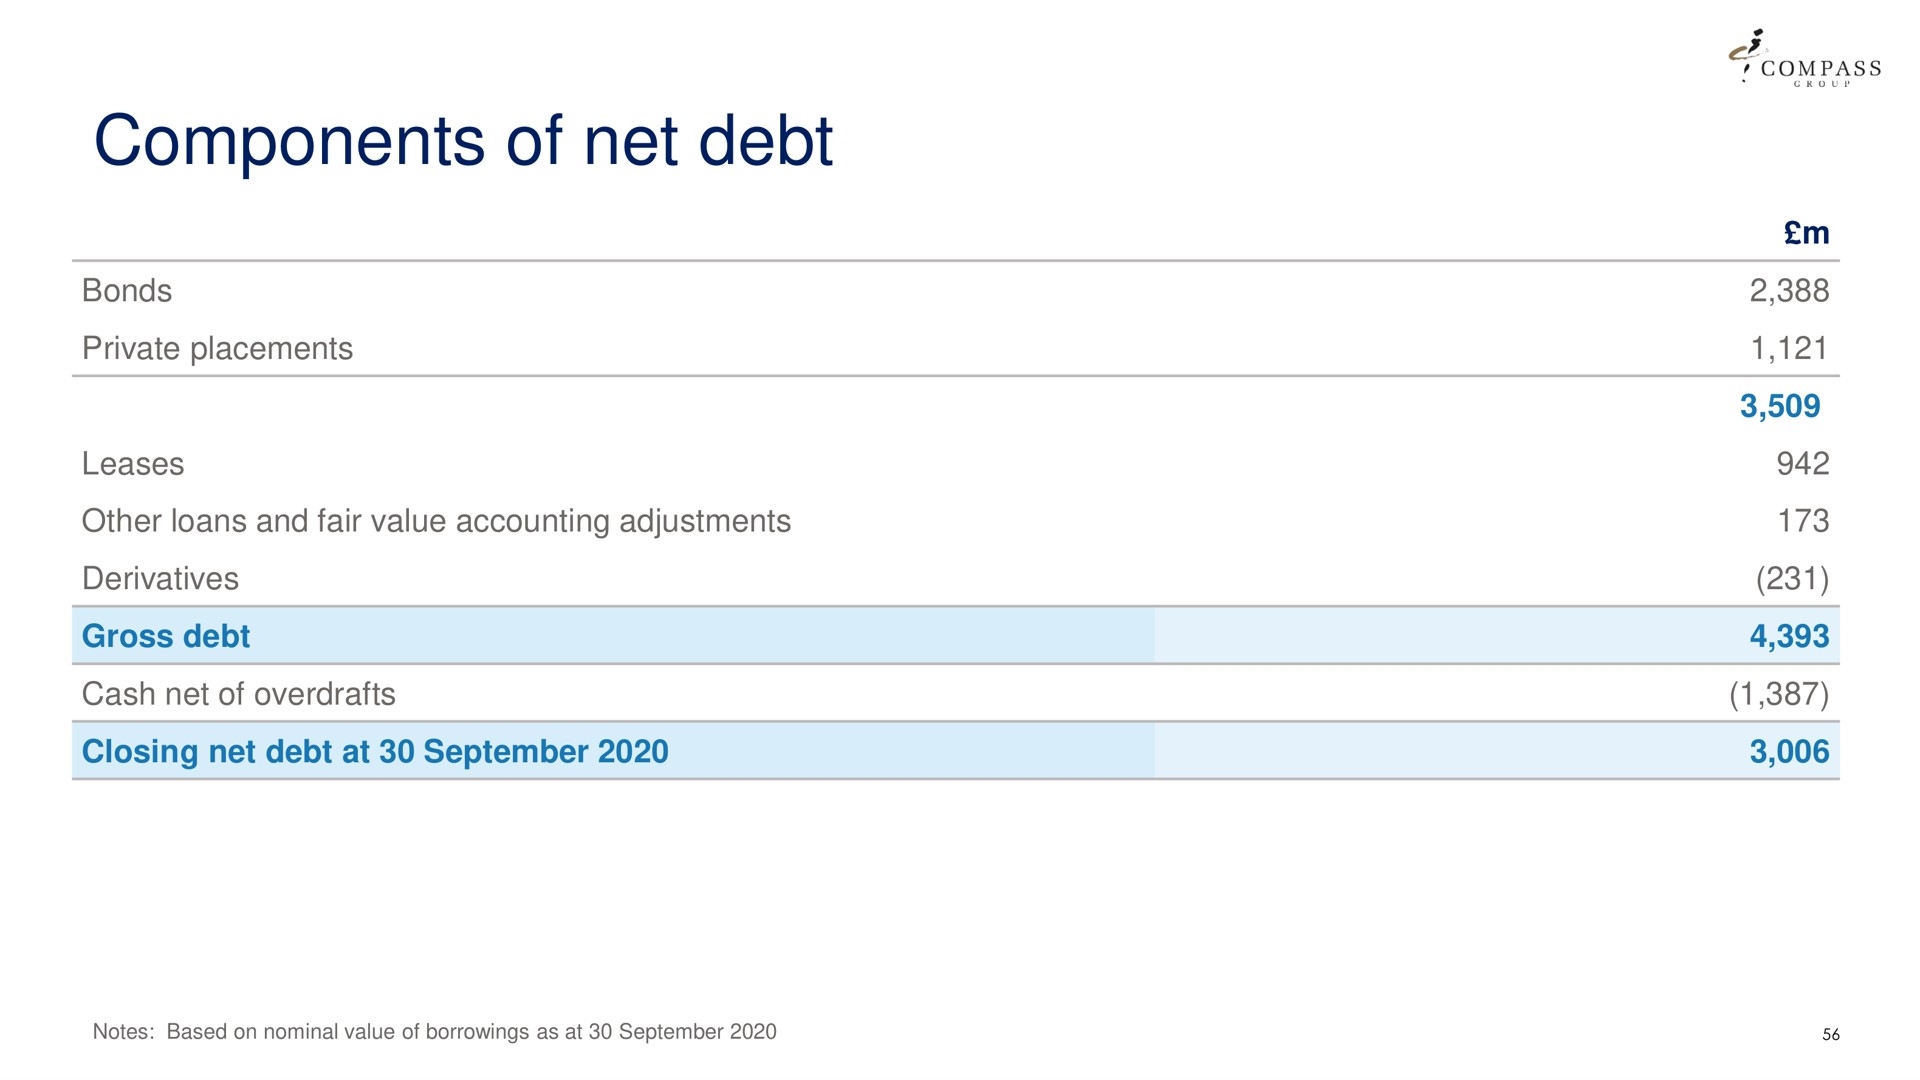 components of net debt | Compass Group